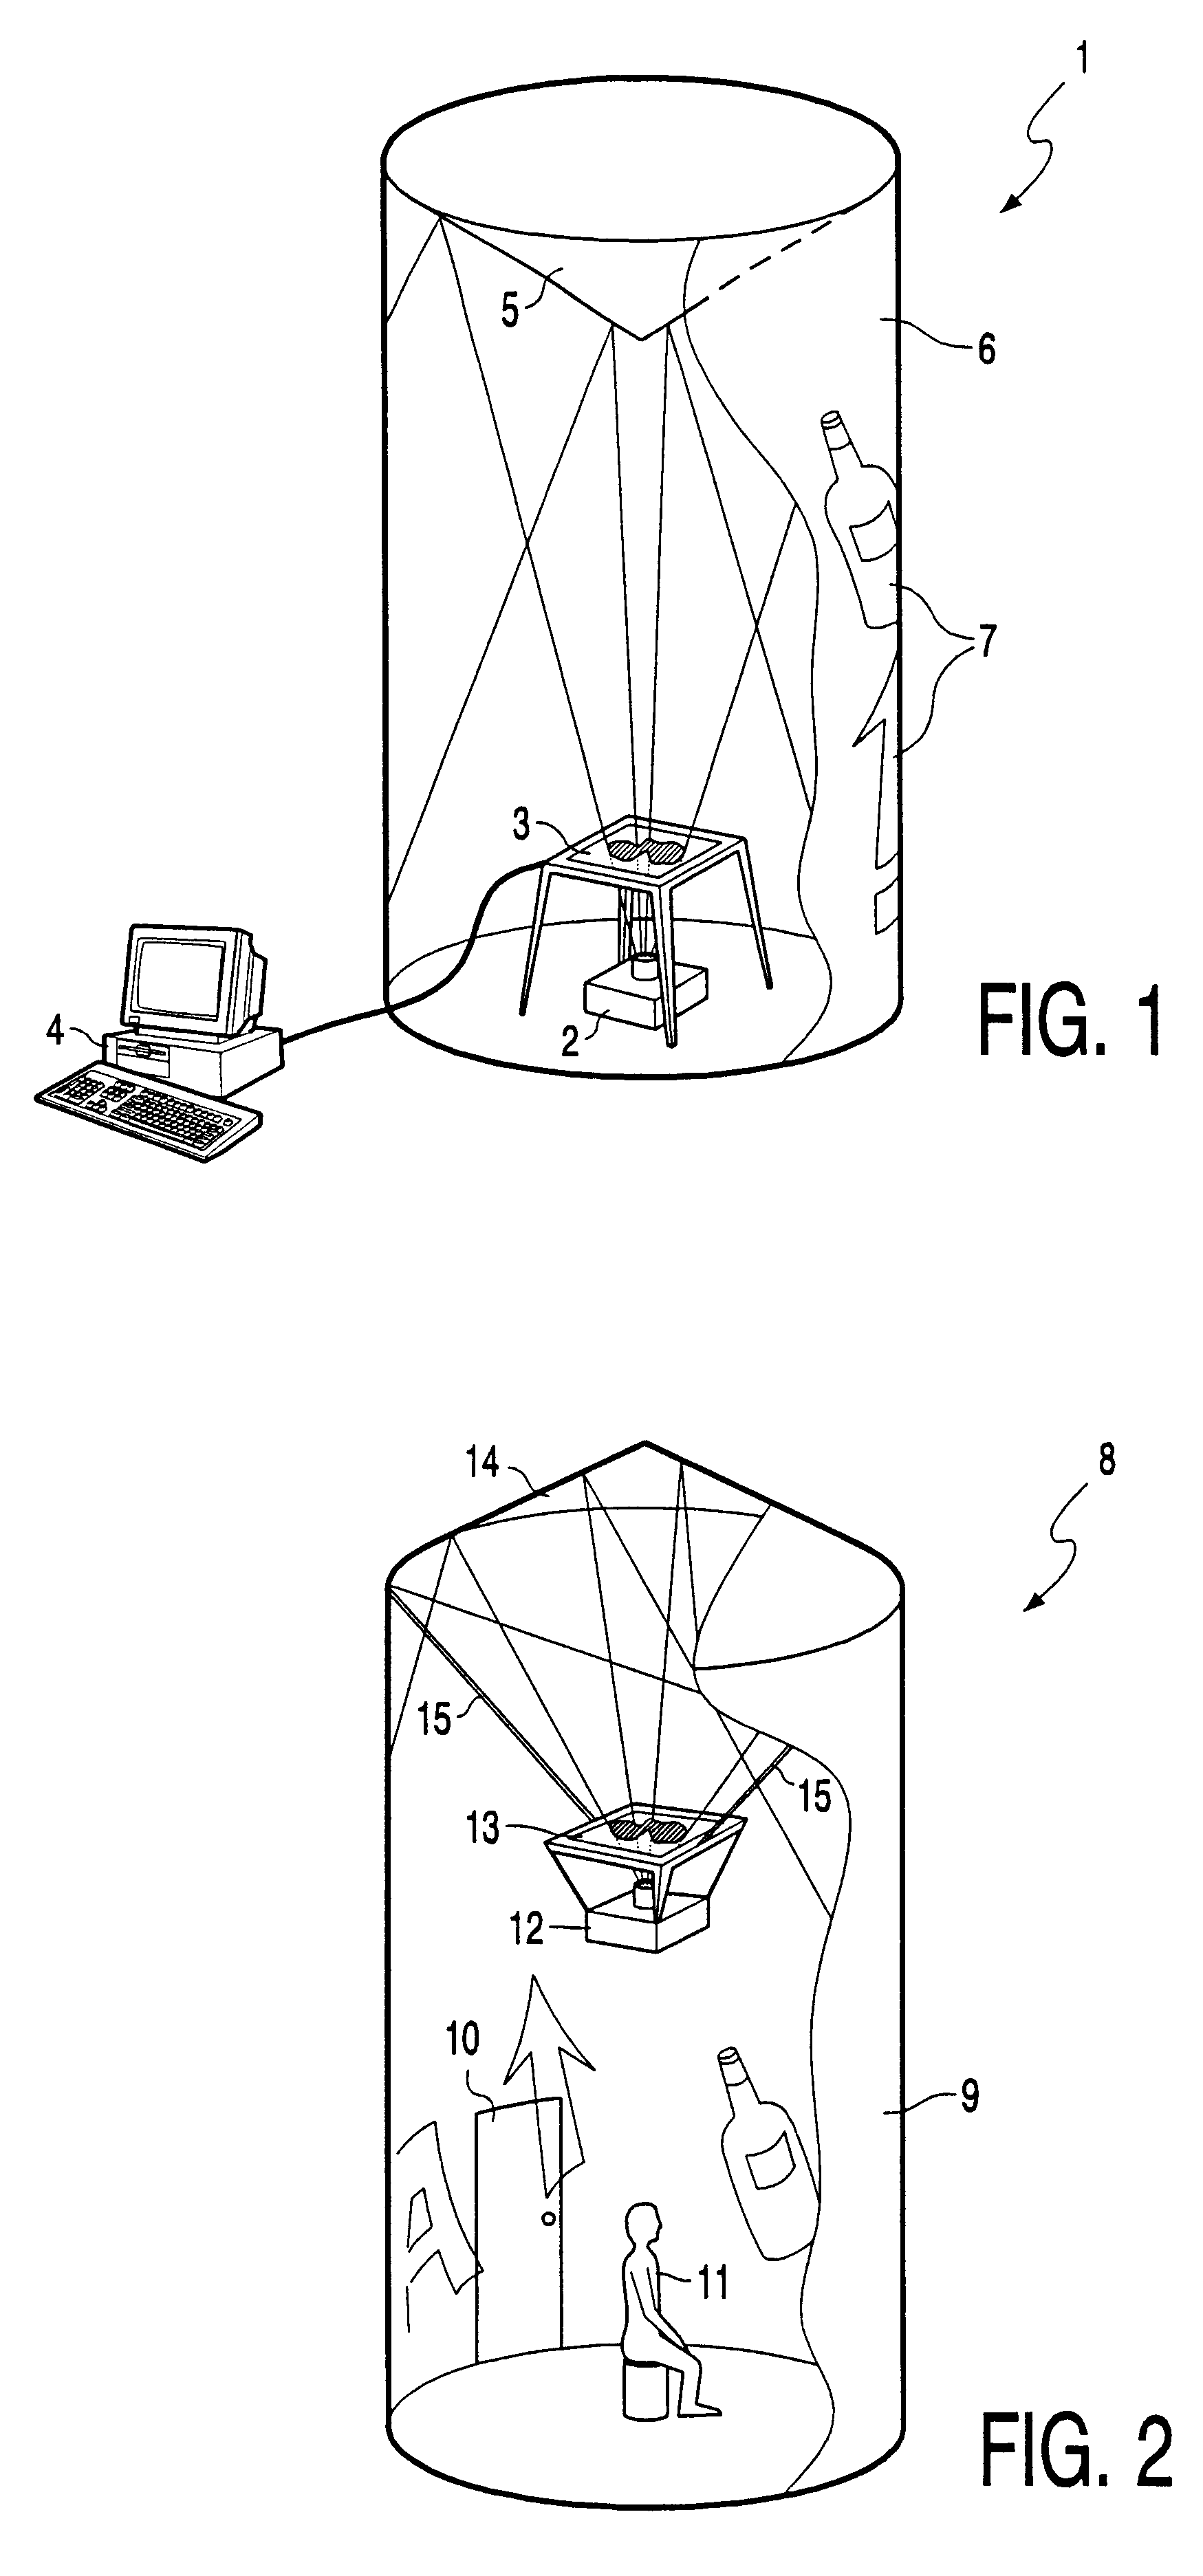 Display device having a cylindrical projection surface such that an image projected onto the inside is visible on the outside